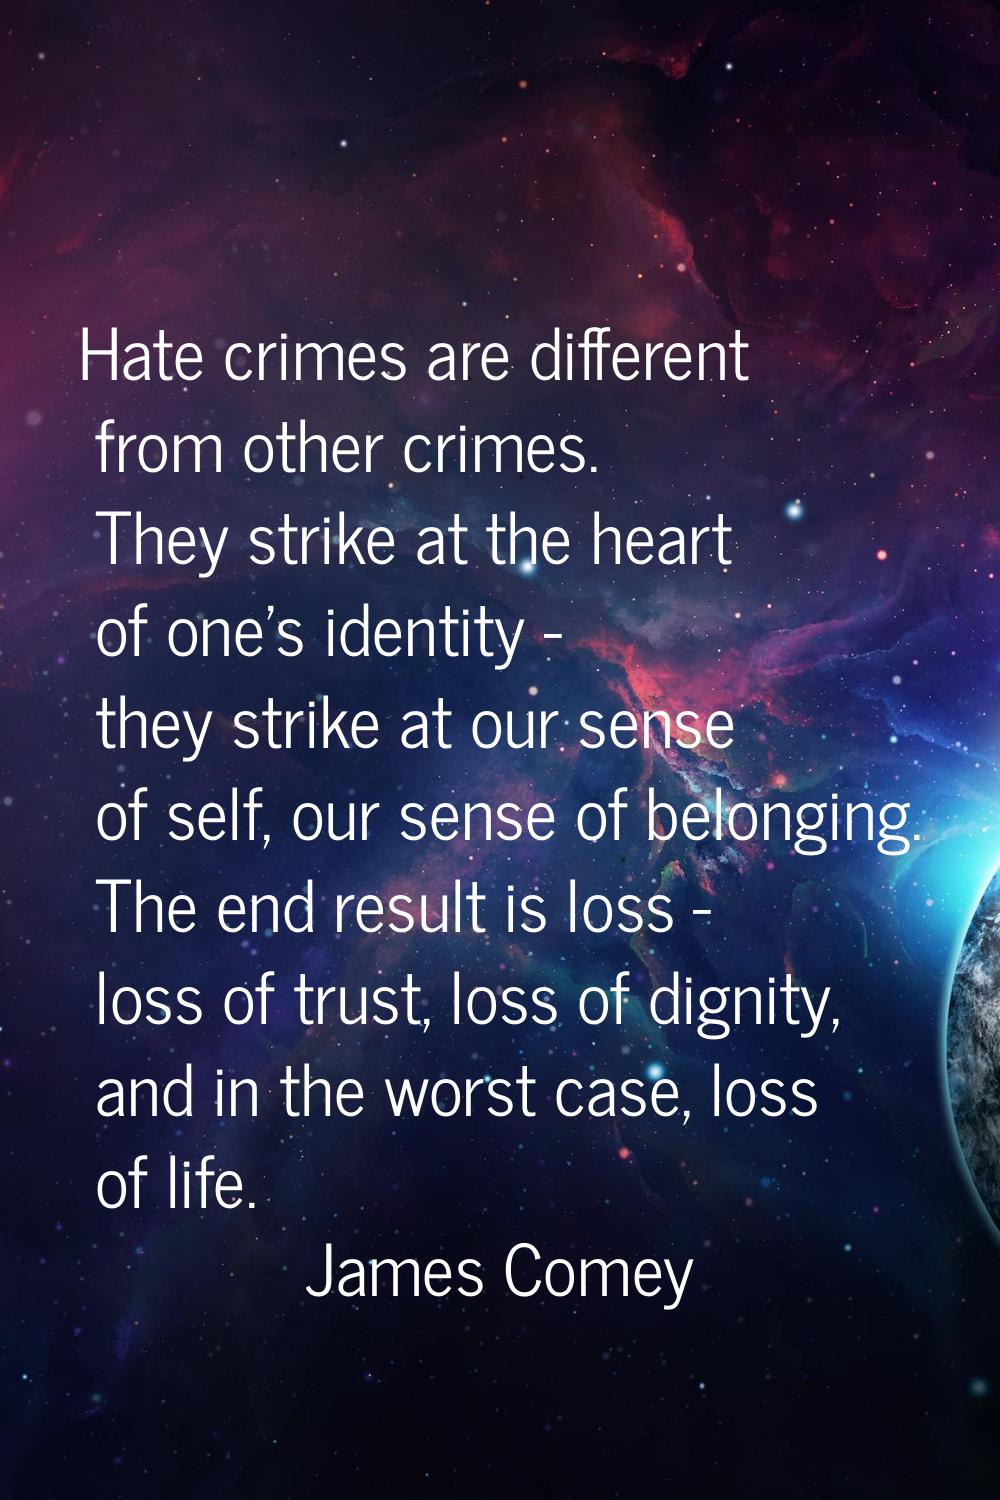 Hate crimes are different from other crimes. They strike at the heart of one's identity - they stri